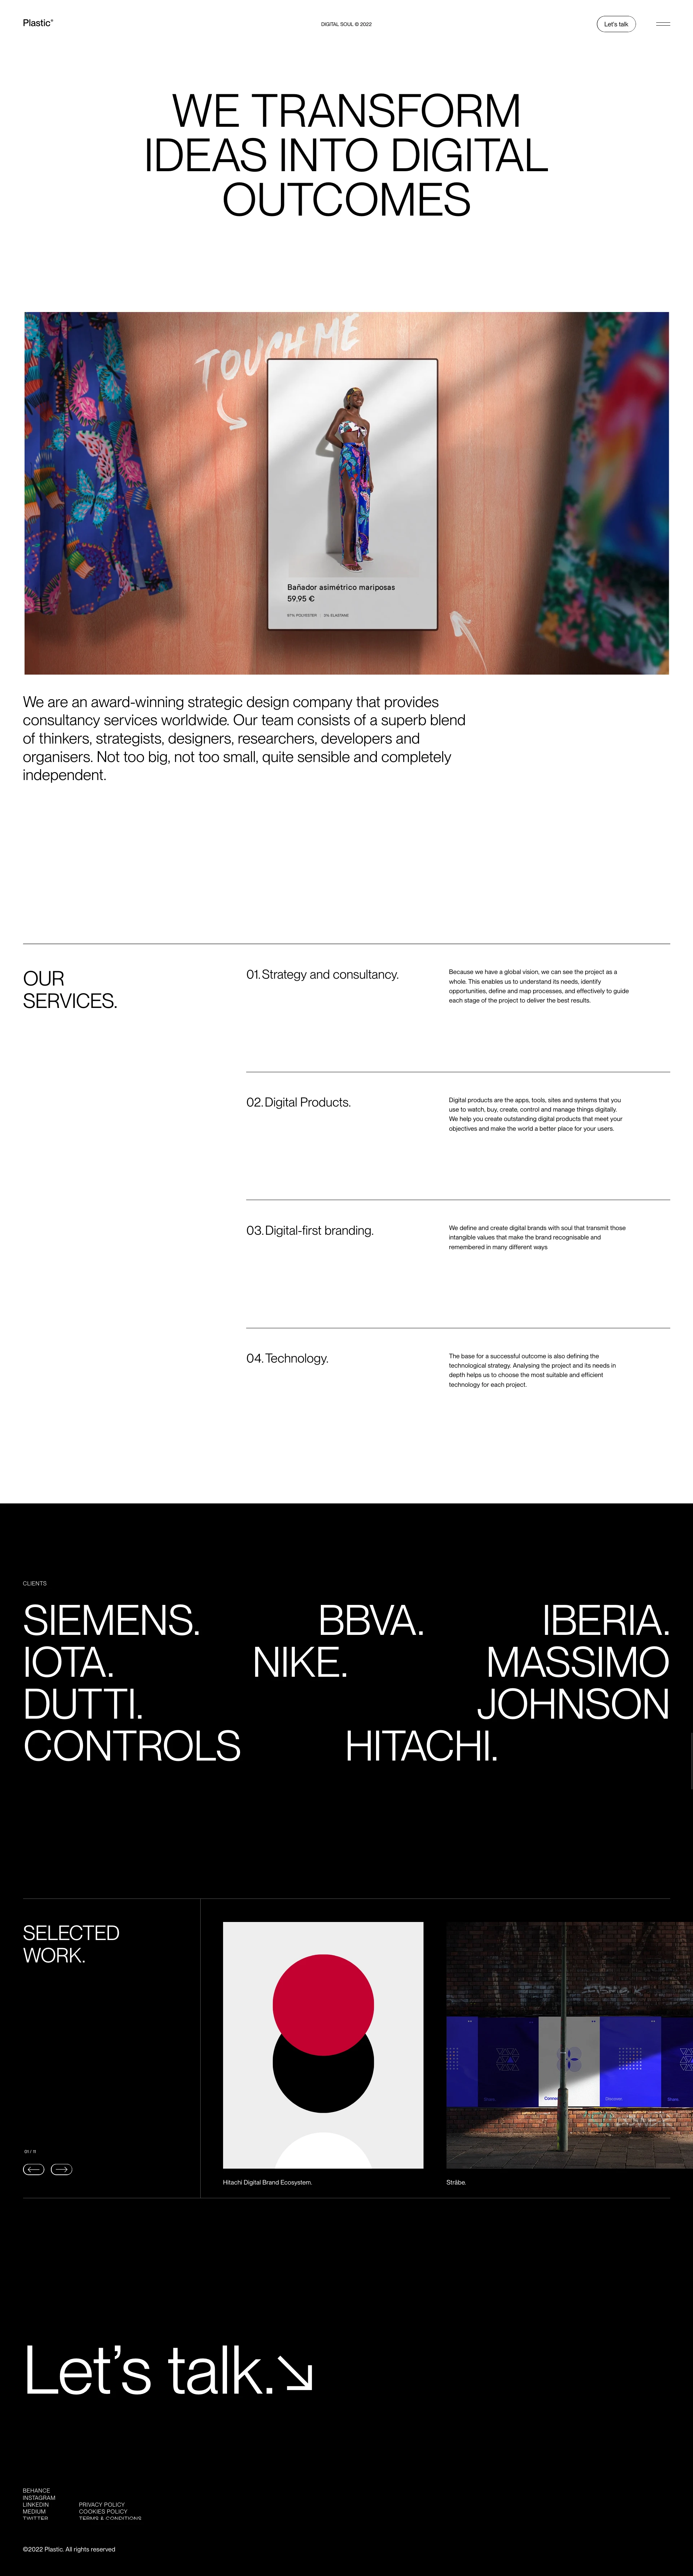 Plastic Landing Page Example: We are an strategic design agency focused on providing high-quality digital services for global companies.